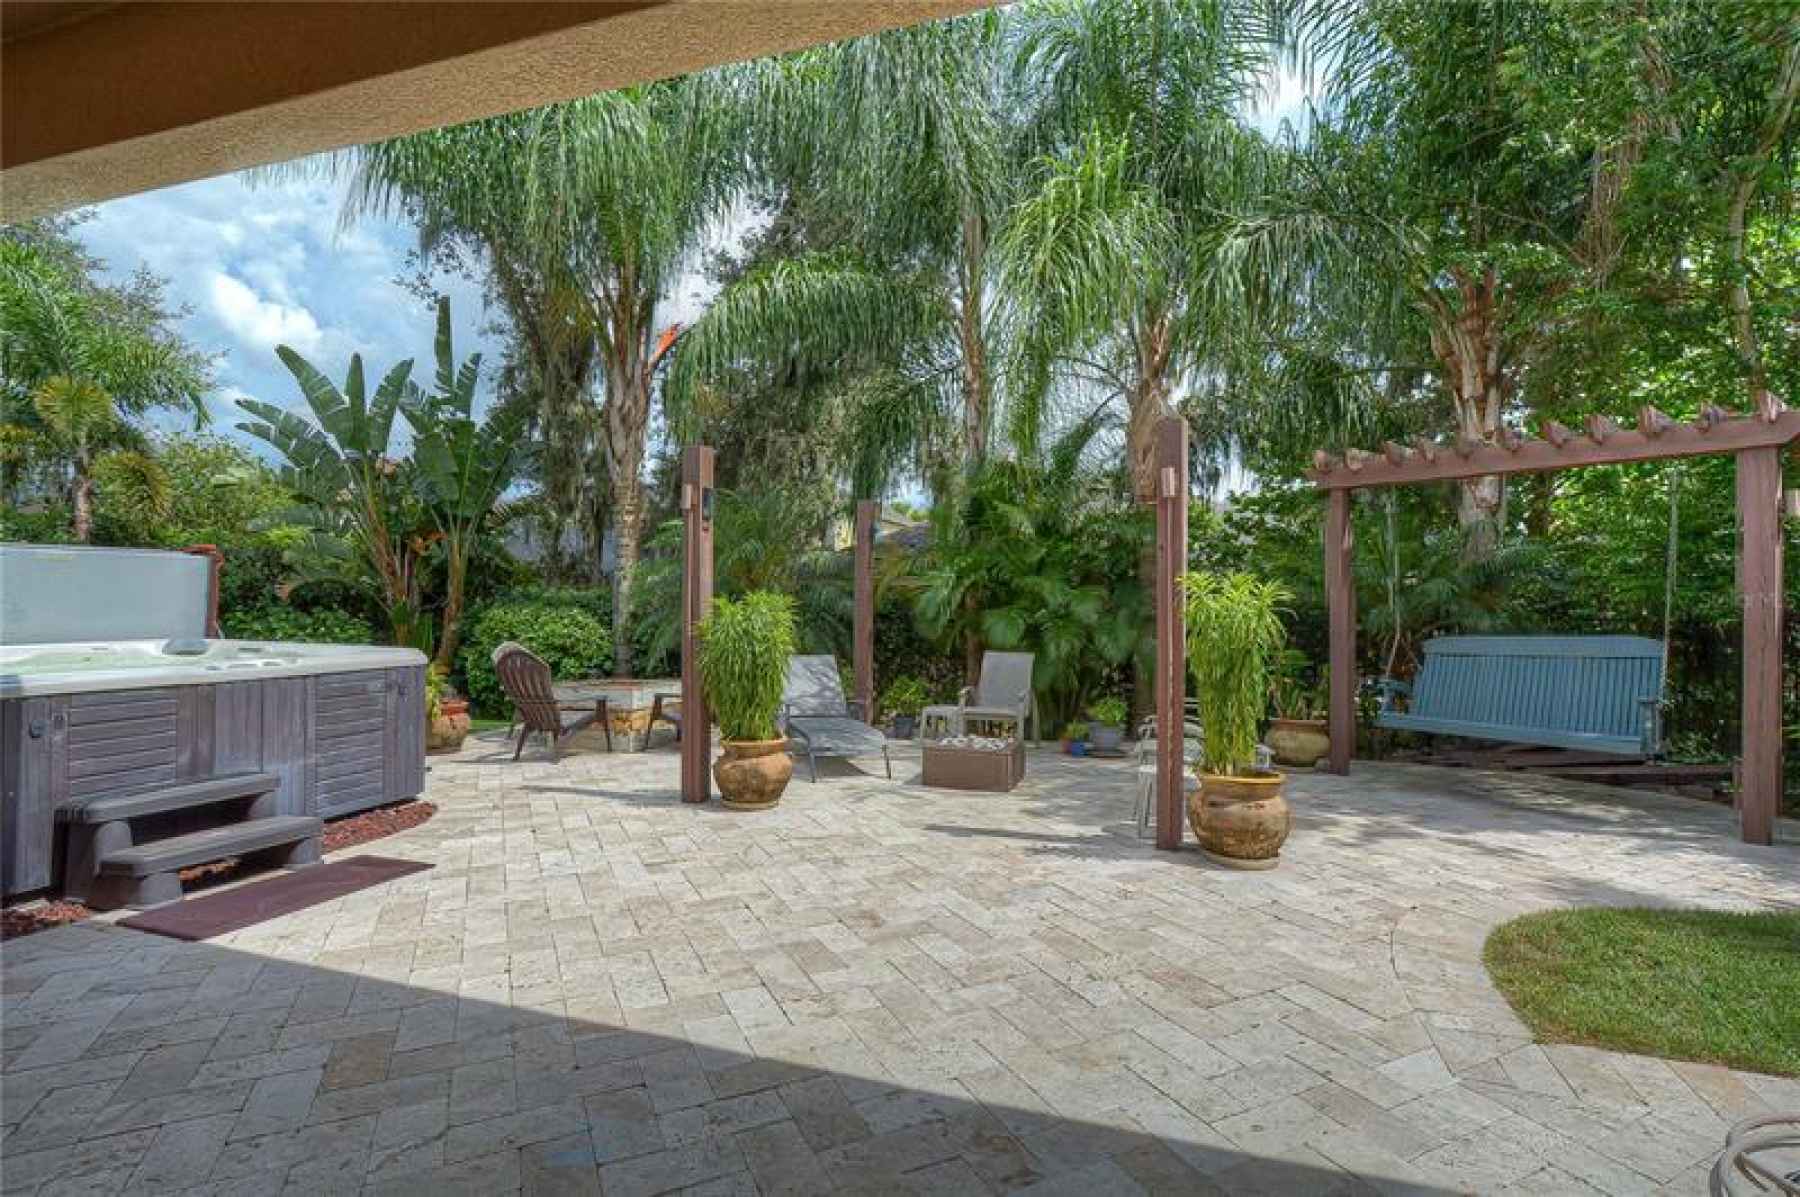 Gorgeous travertine pavers create a magnificent lanai space with a custom fire pit area and bench sw